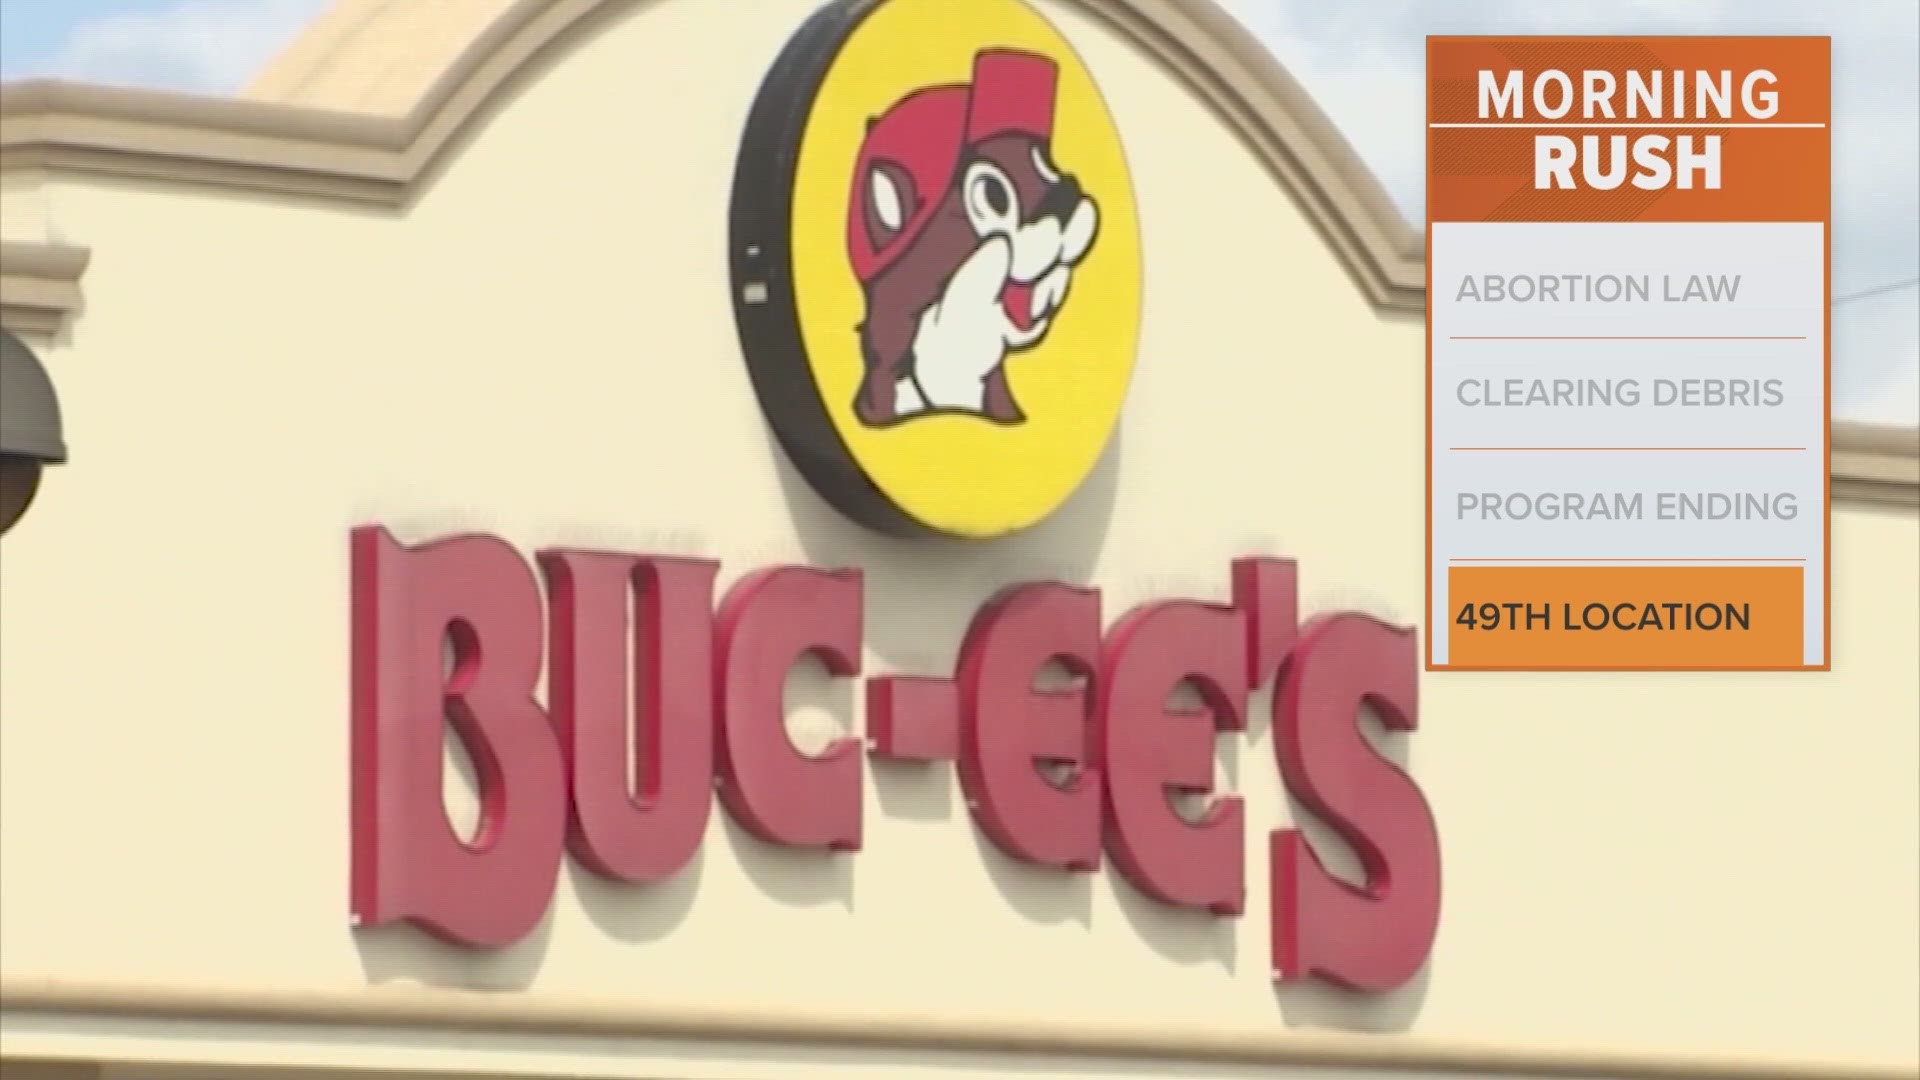 After this Hillsboro location opens, Buc-ee’s will operate 49 stores across Texas and other southern states.